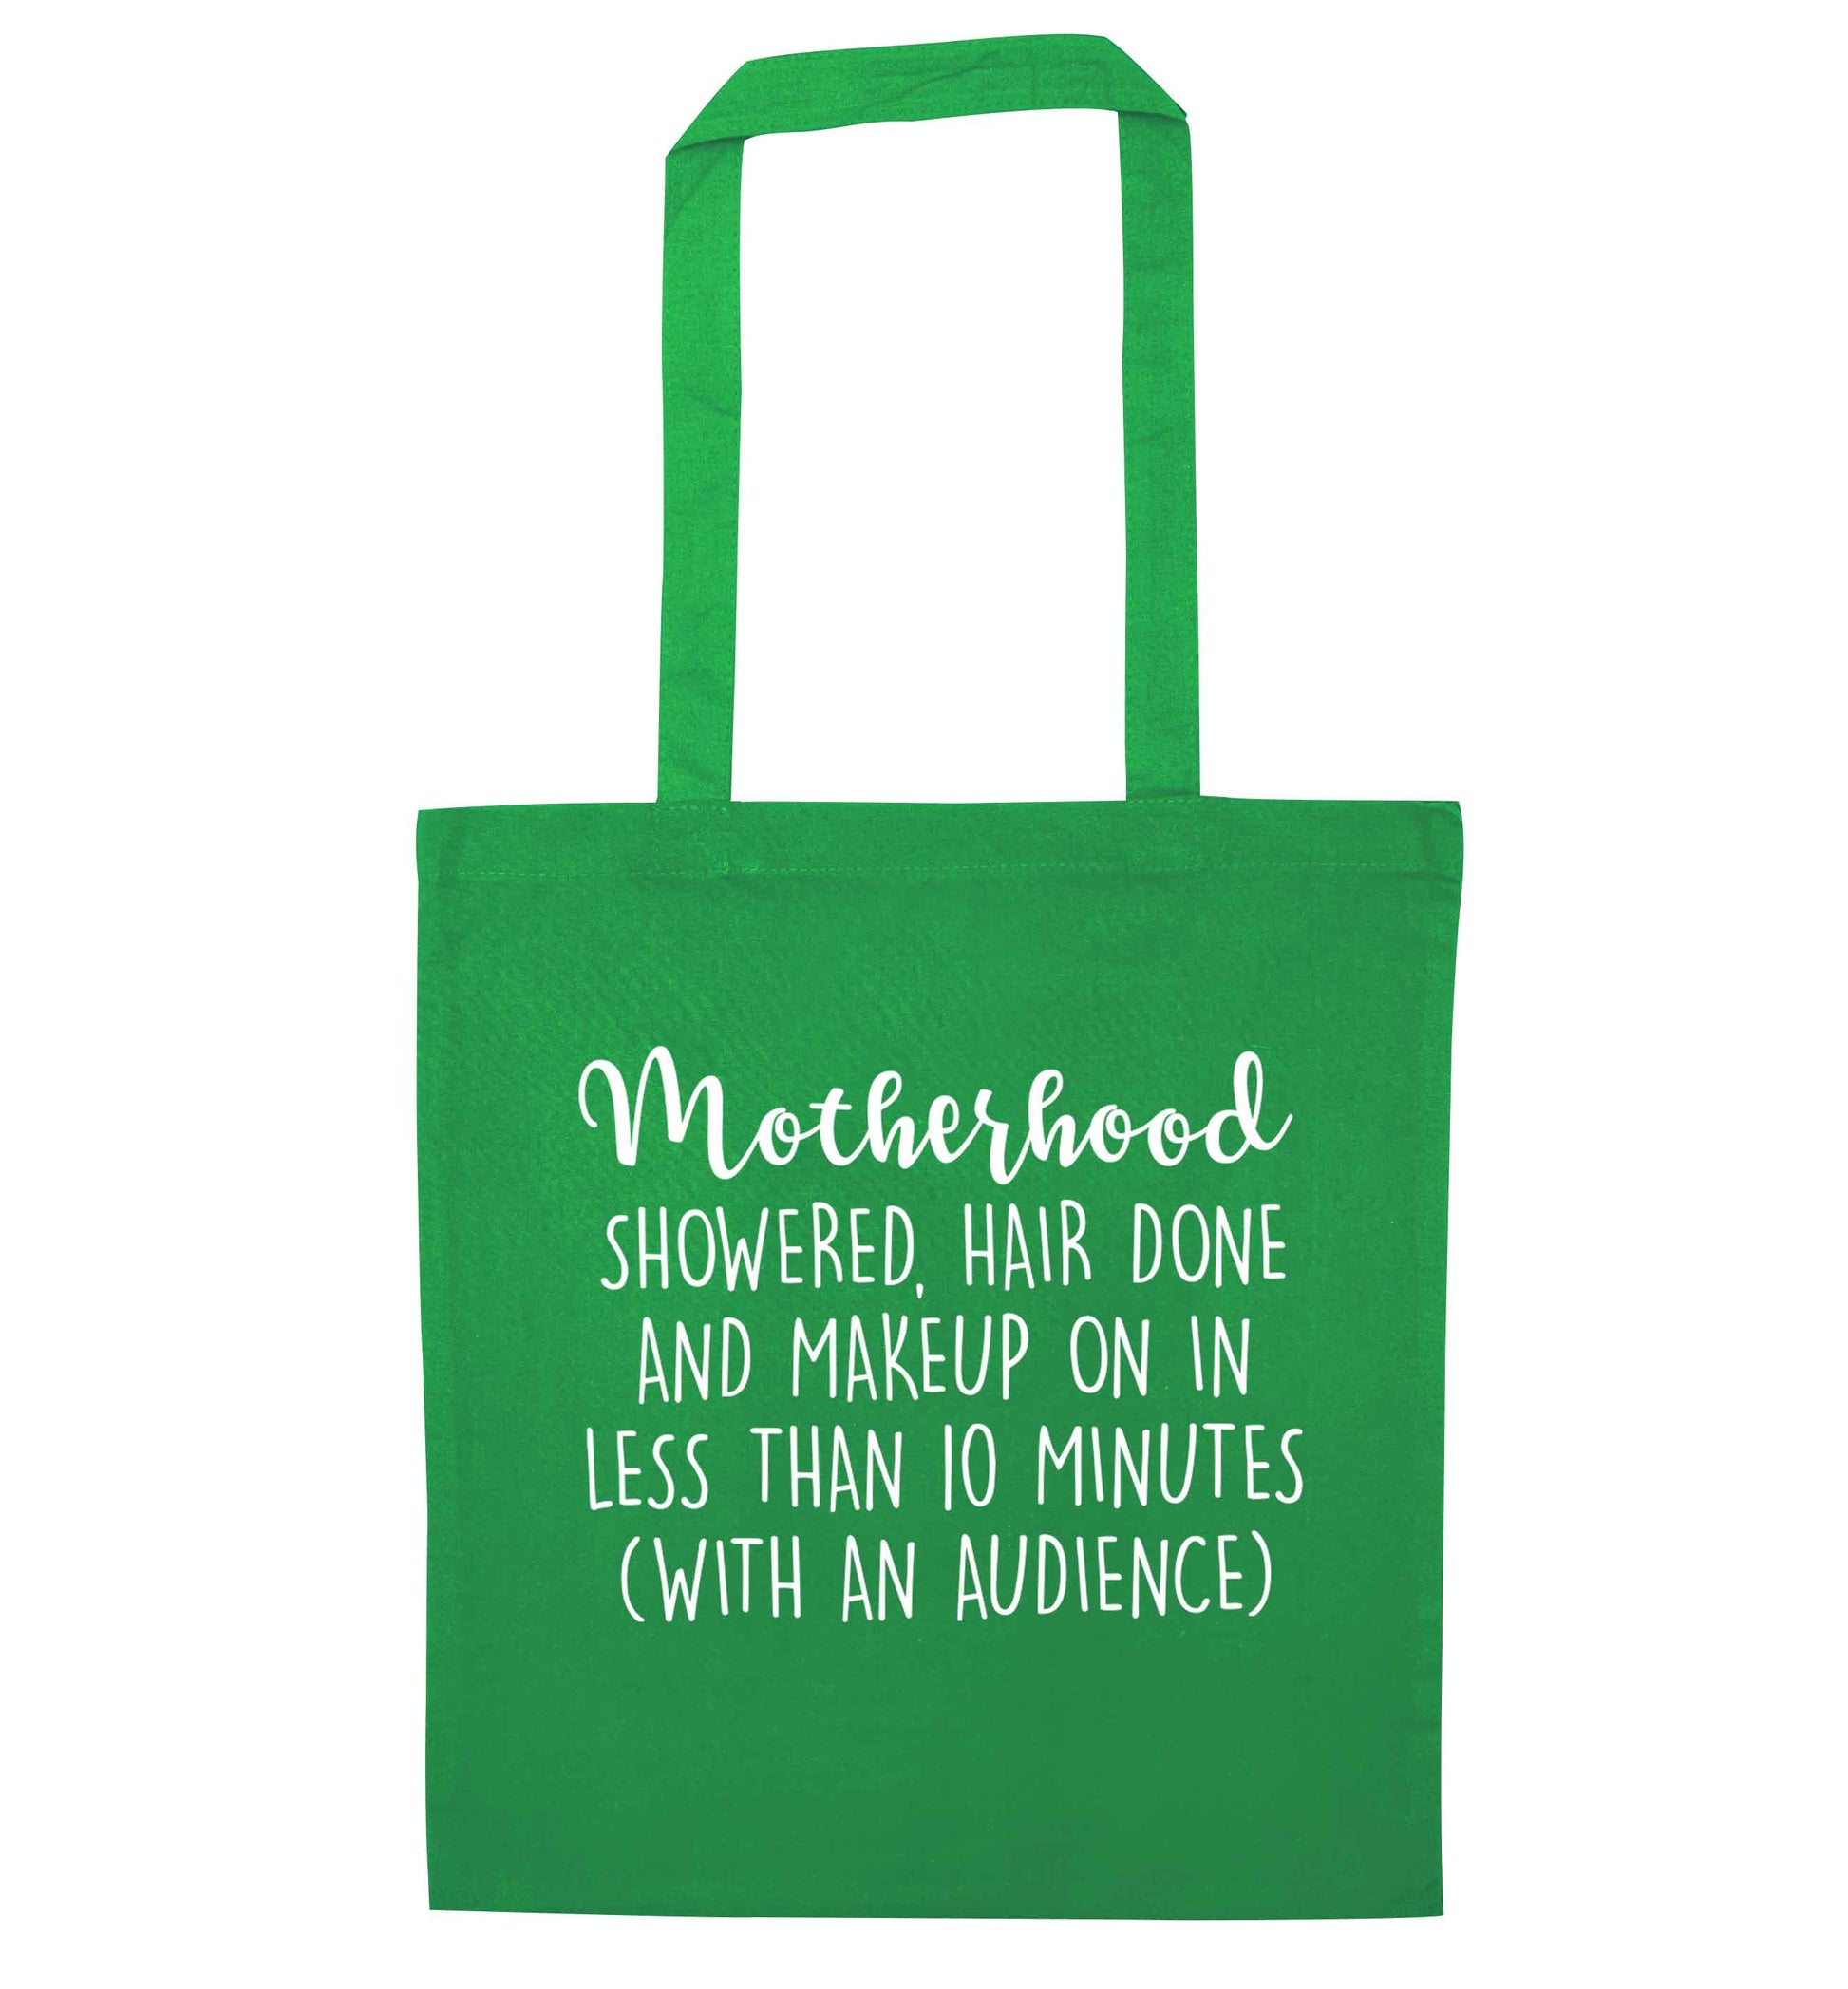 Motherhood, showered, hair done and makeup on green tote bag